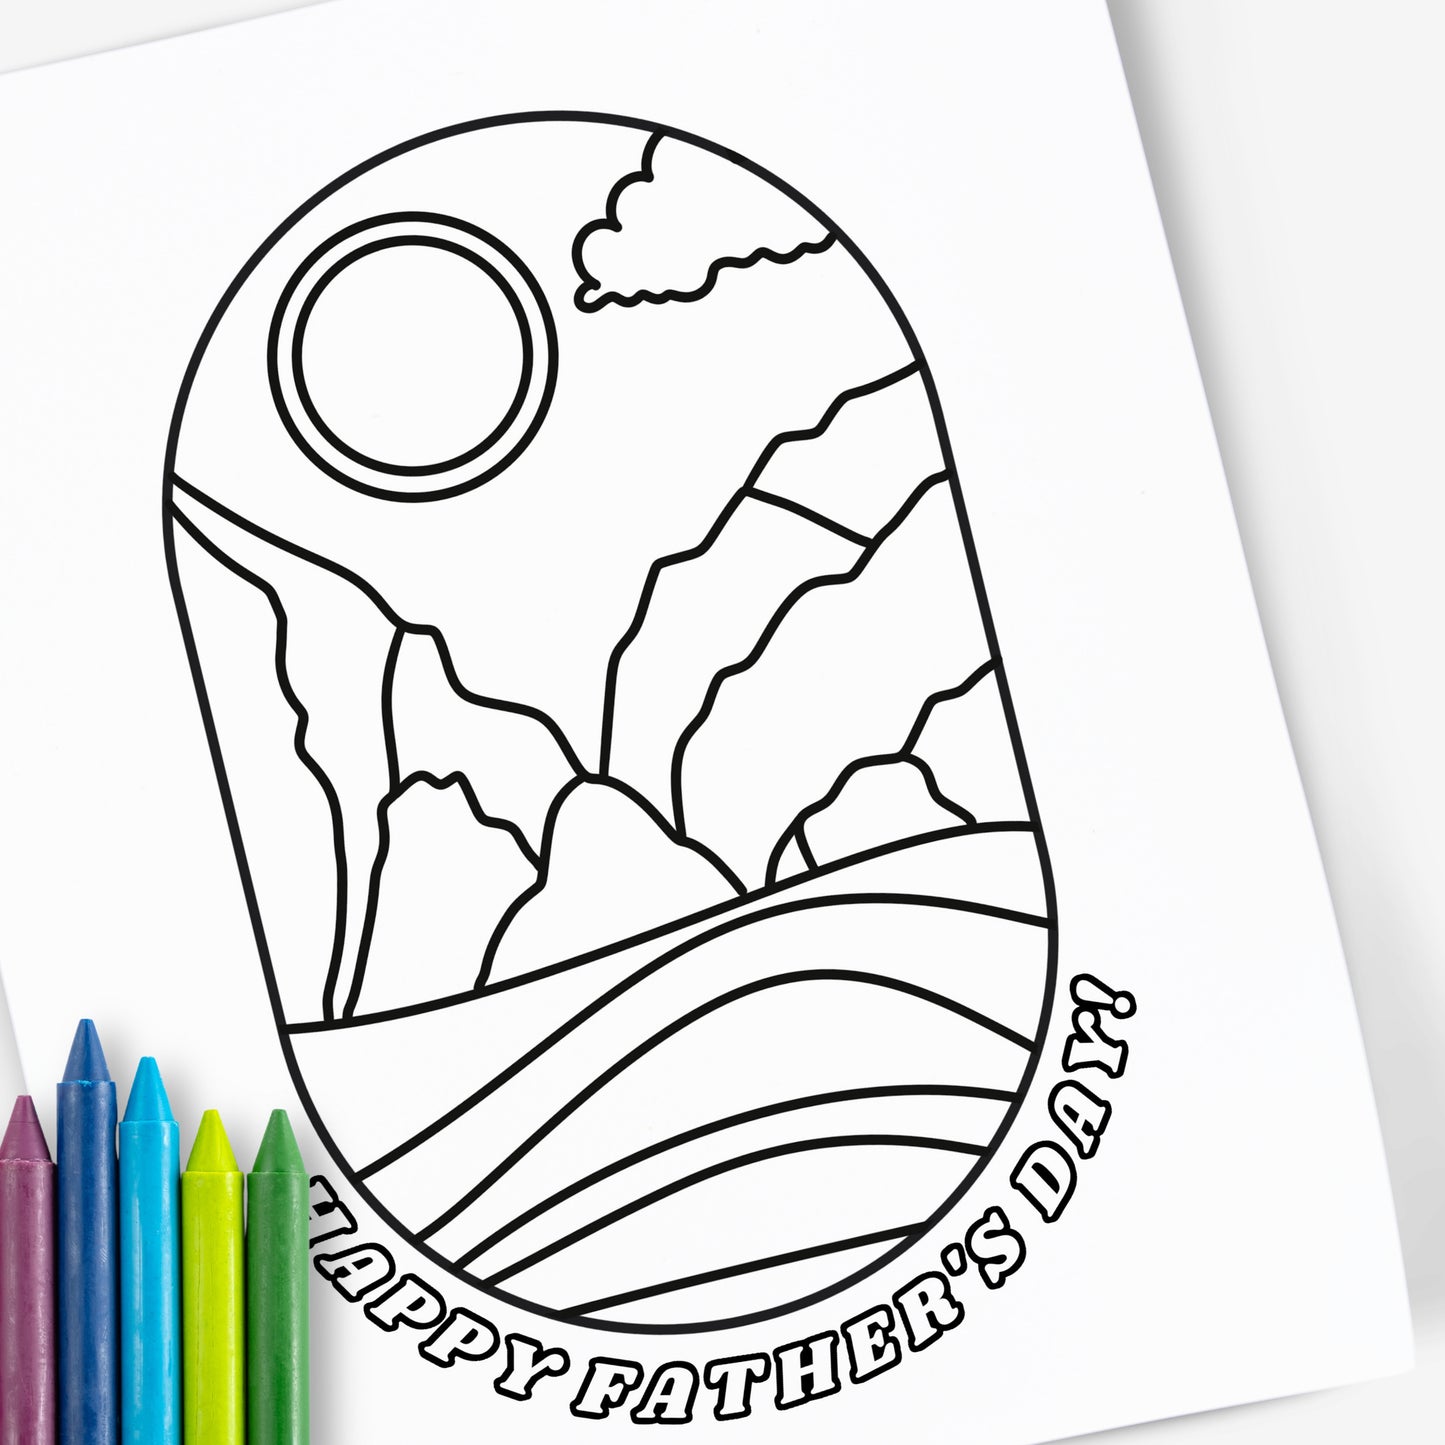 10 Father's Day Printable Coloring Pages | Illustrated Fishing Camping Awards & Medals Coloring Sheets